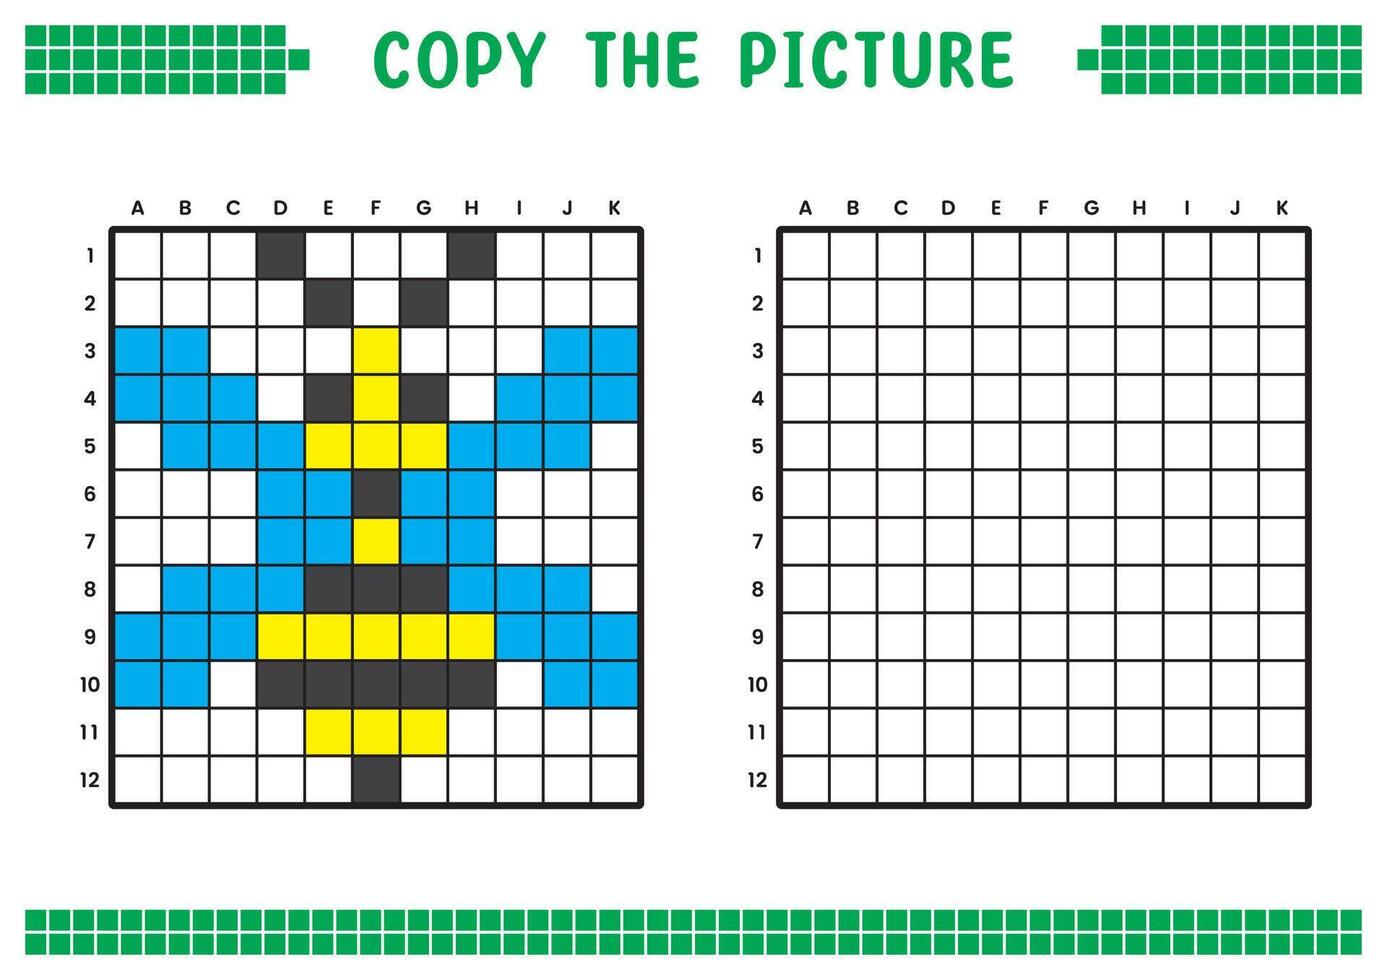 Copy the picture, complete the grid image. Educational worksheets drawing with squares, coloring cell areas. Children's preschool activities. Cartoon, pixel art. Honey bee illustration. vector